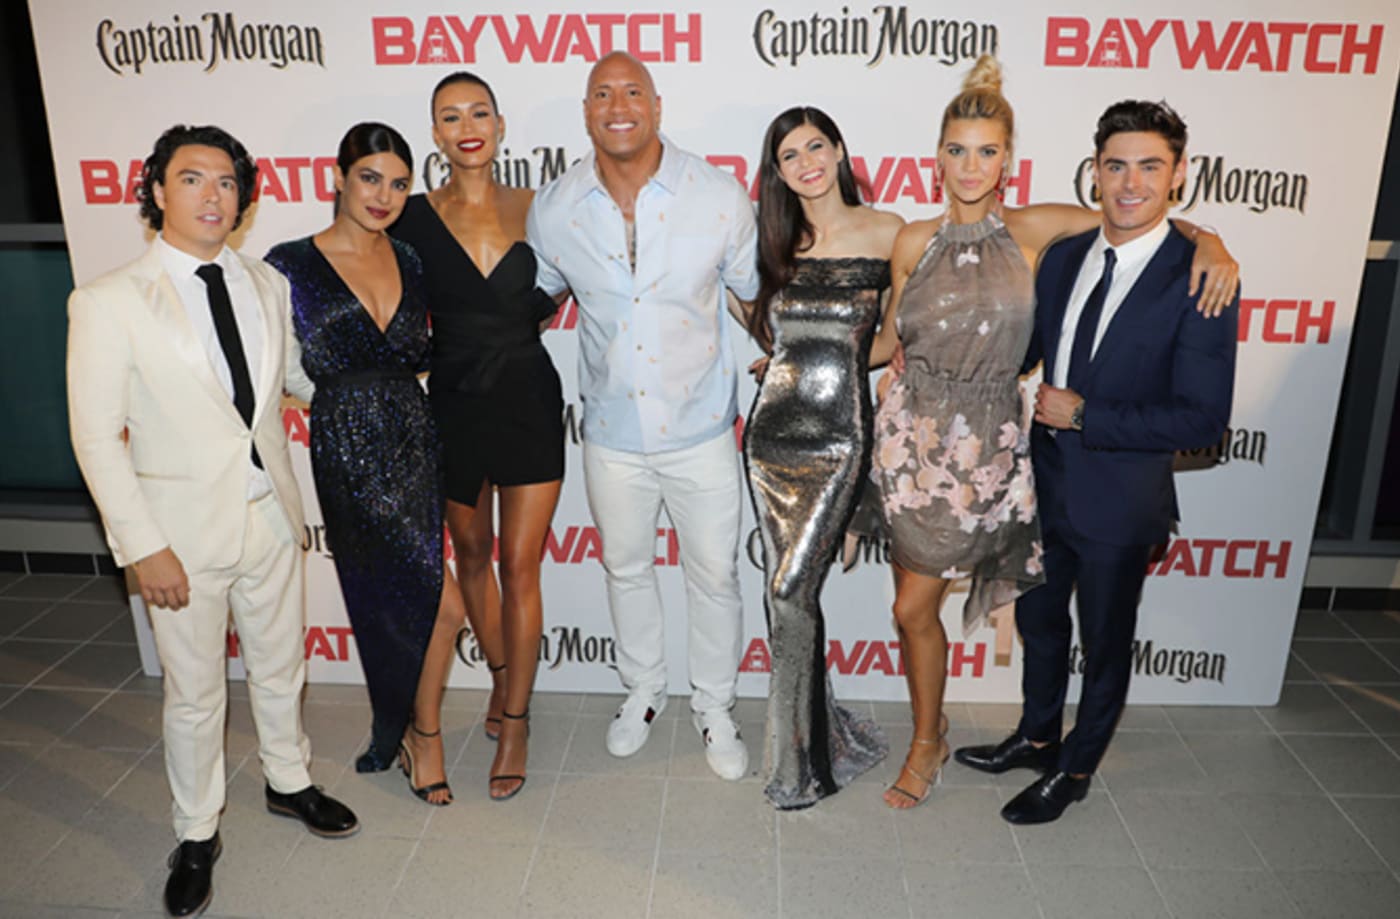 This is a photo of Baywatch.